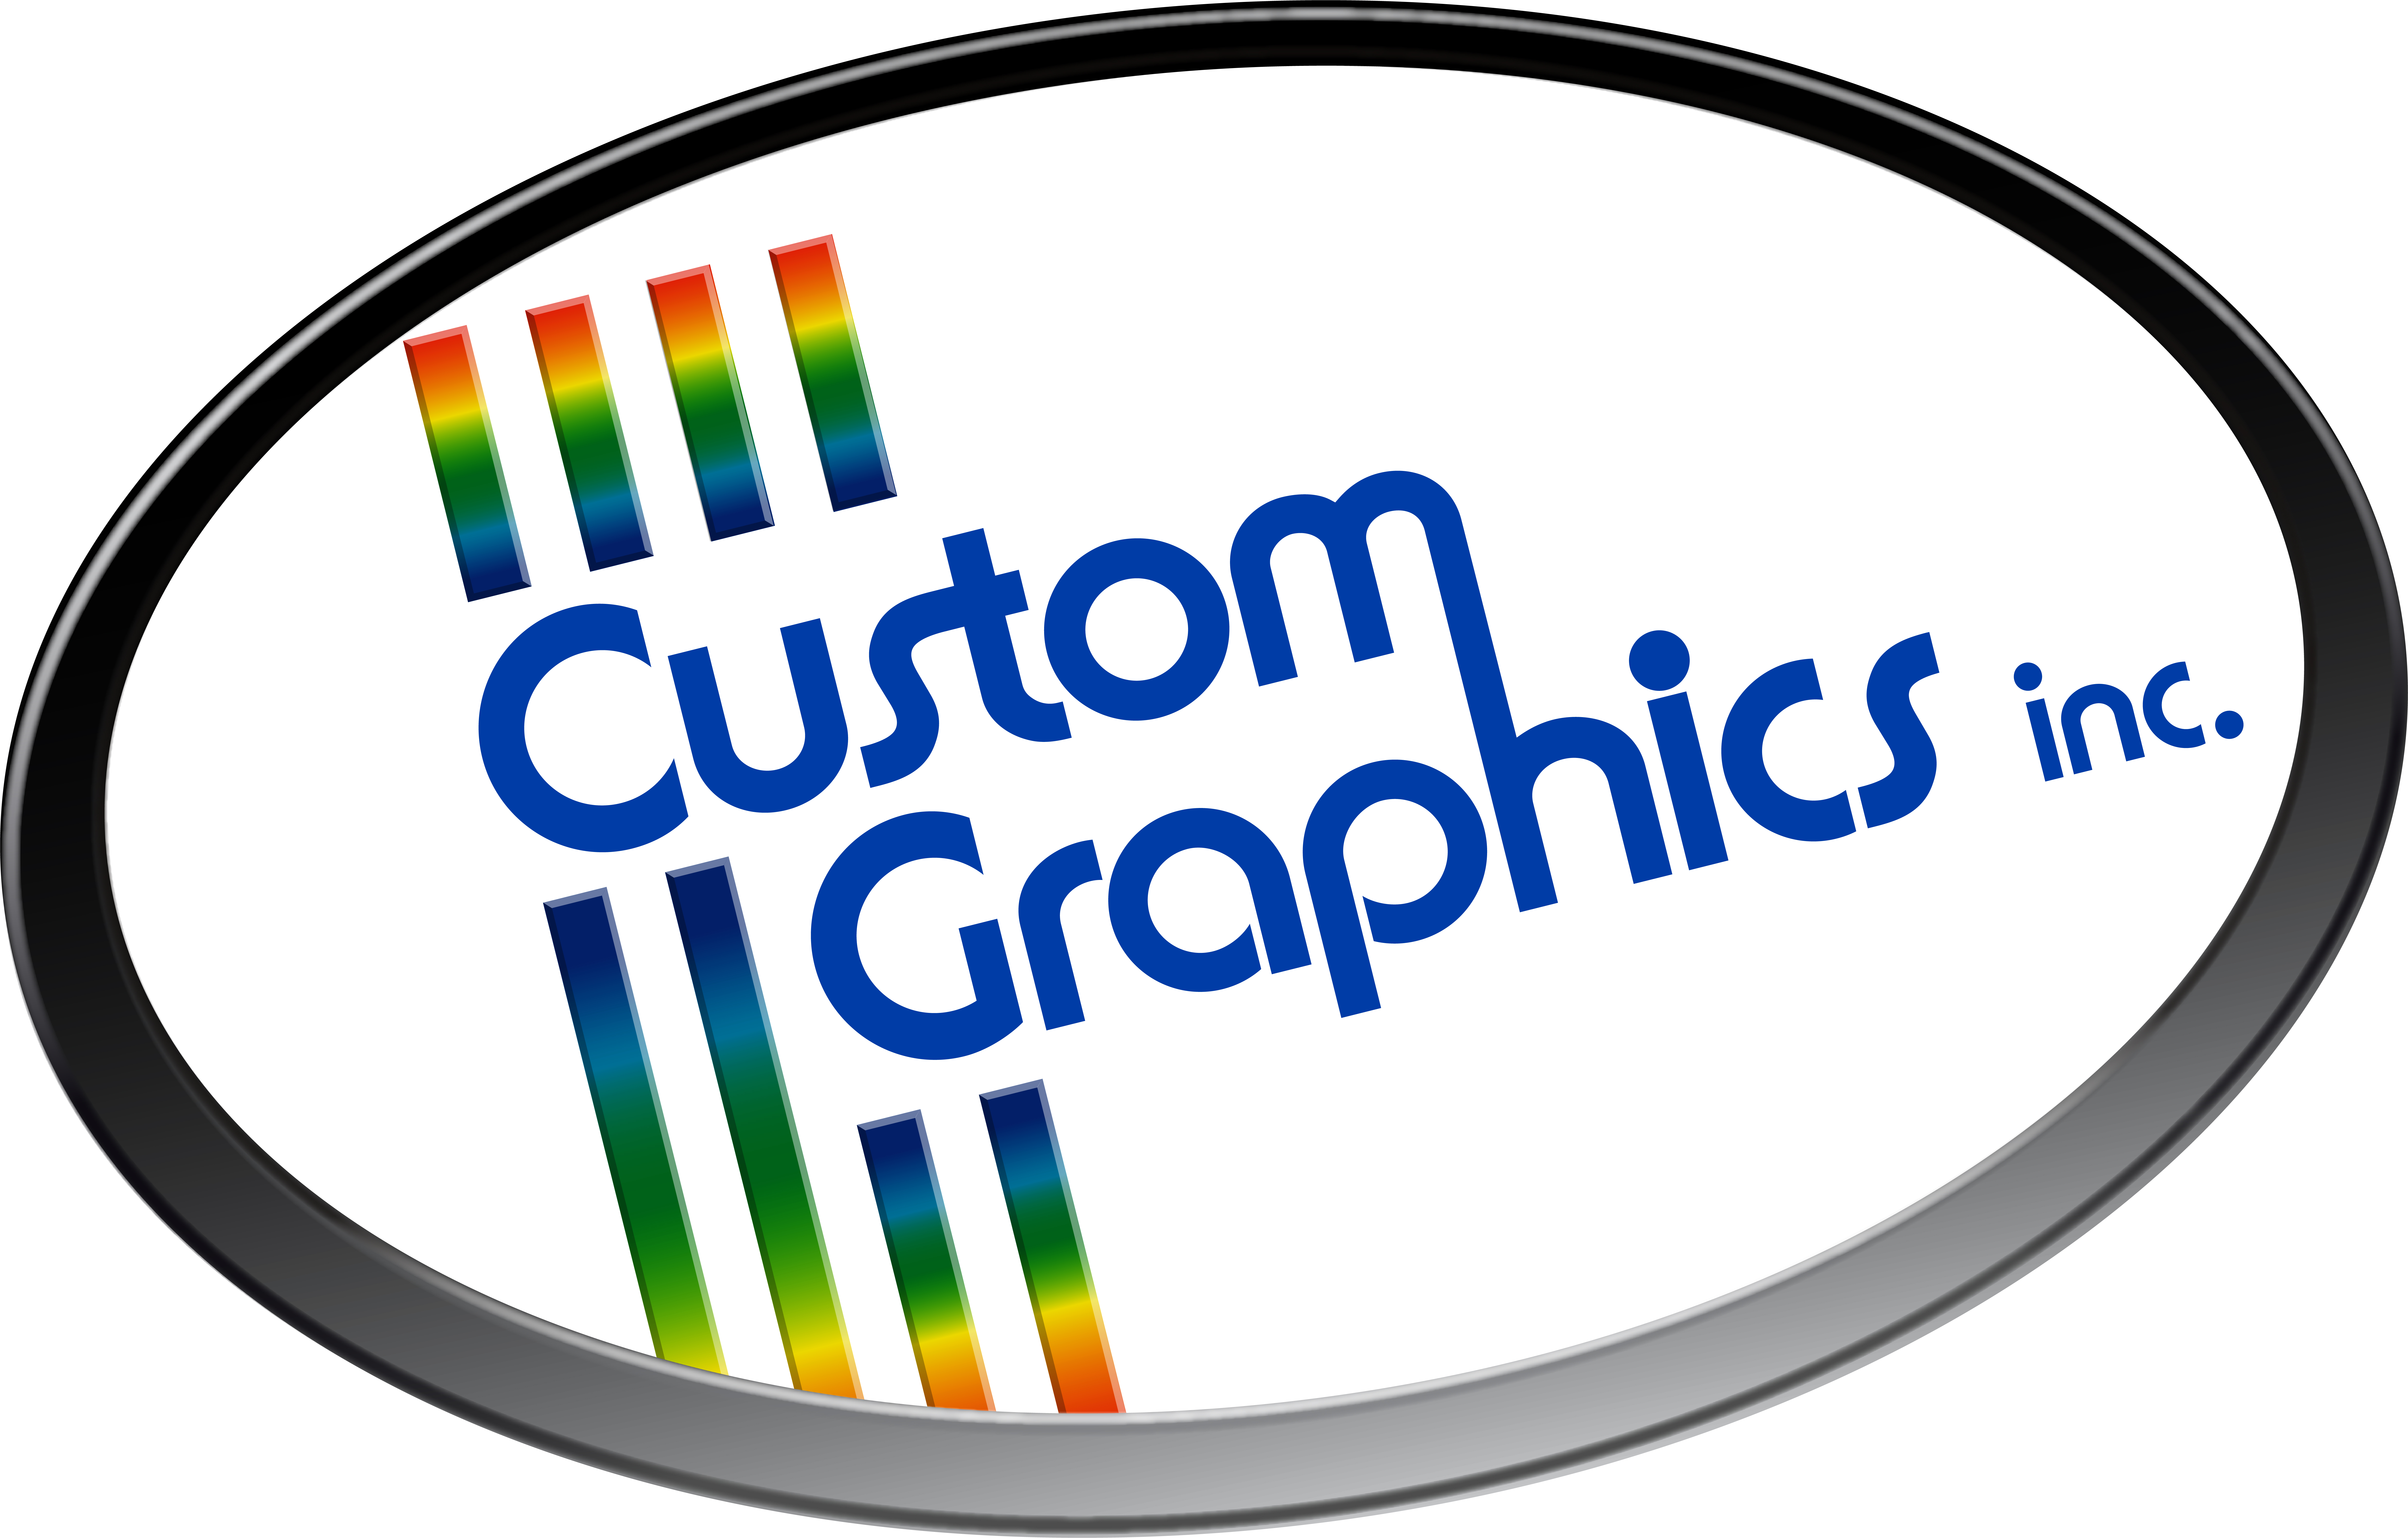 This image shows the Custom Graphics logo.